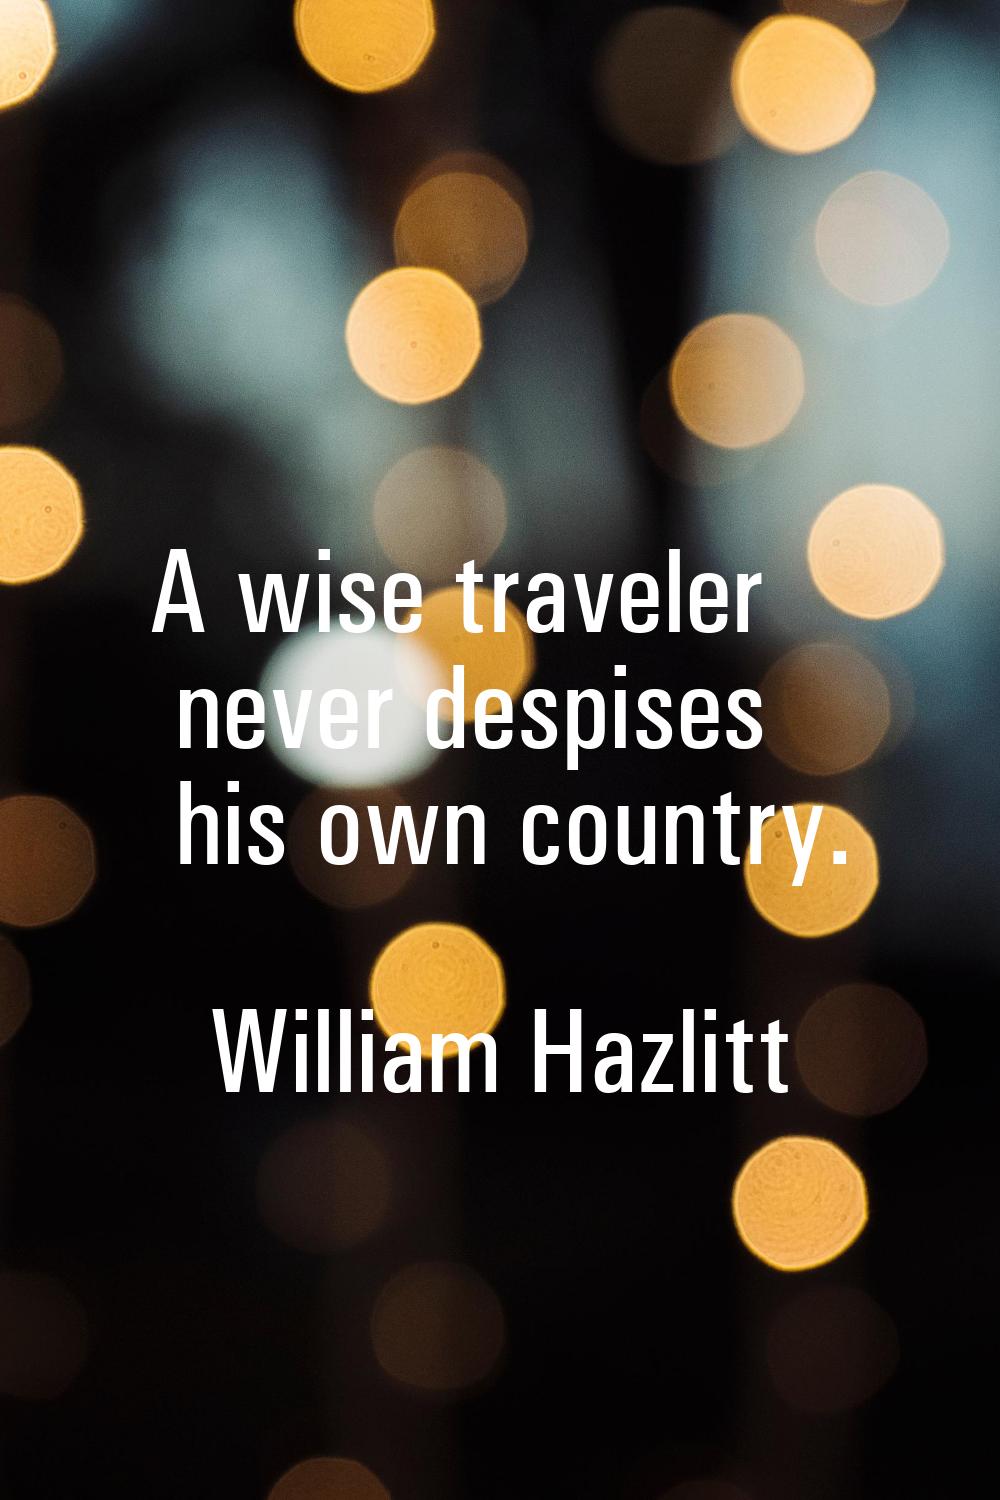 A wise traveler never despises his own country.